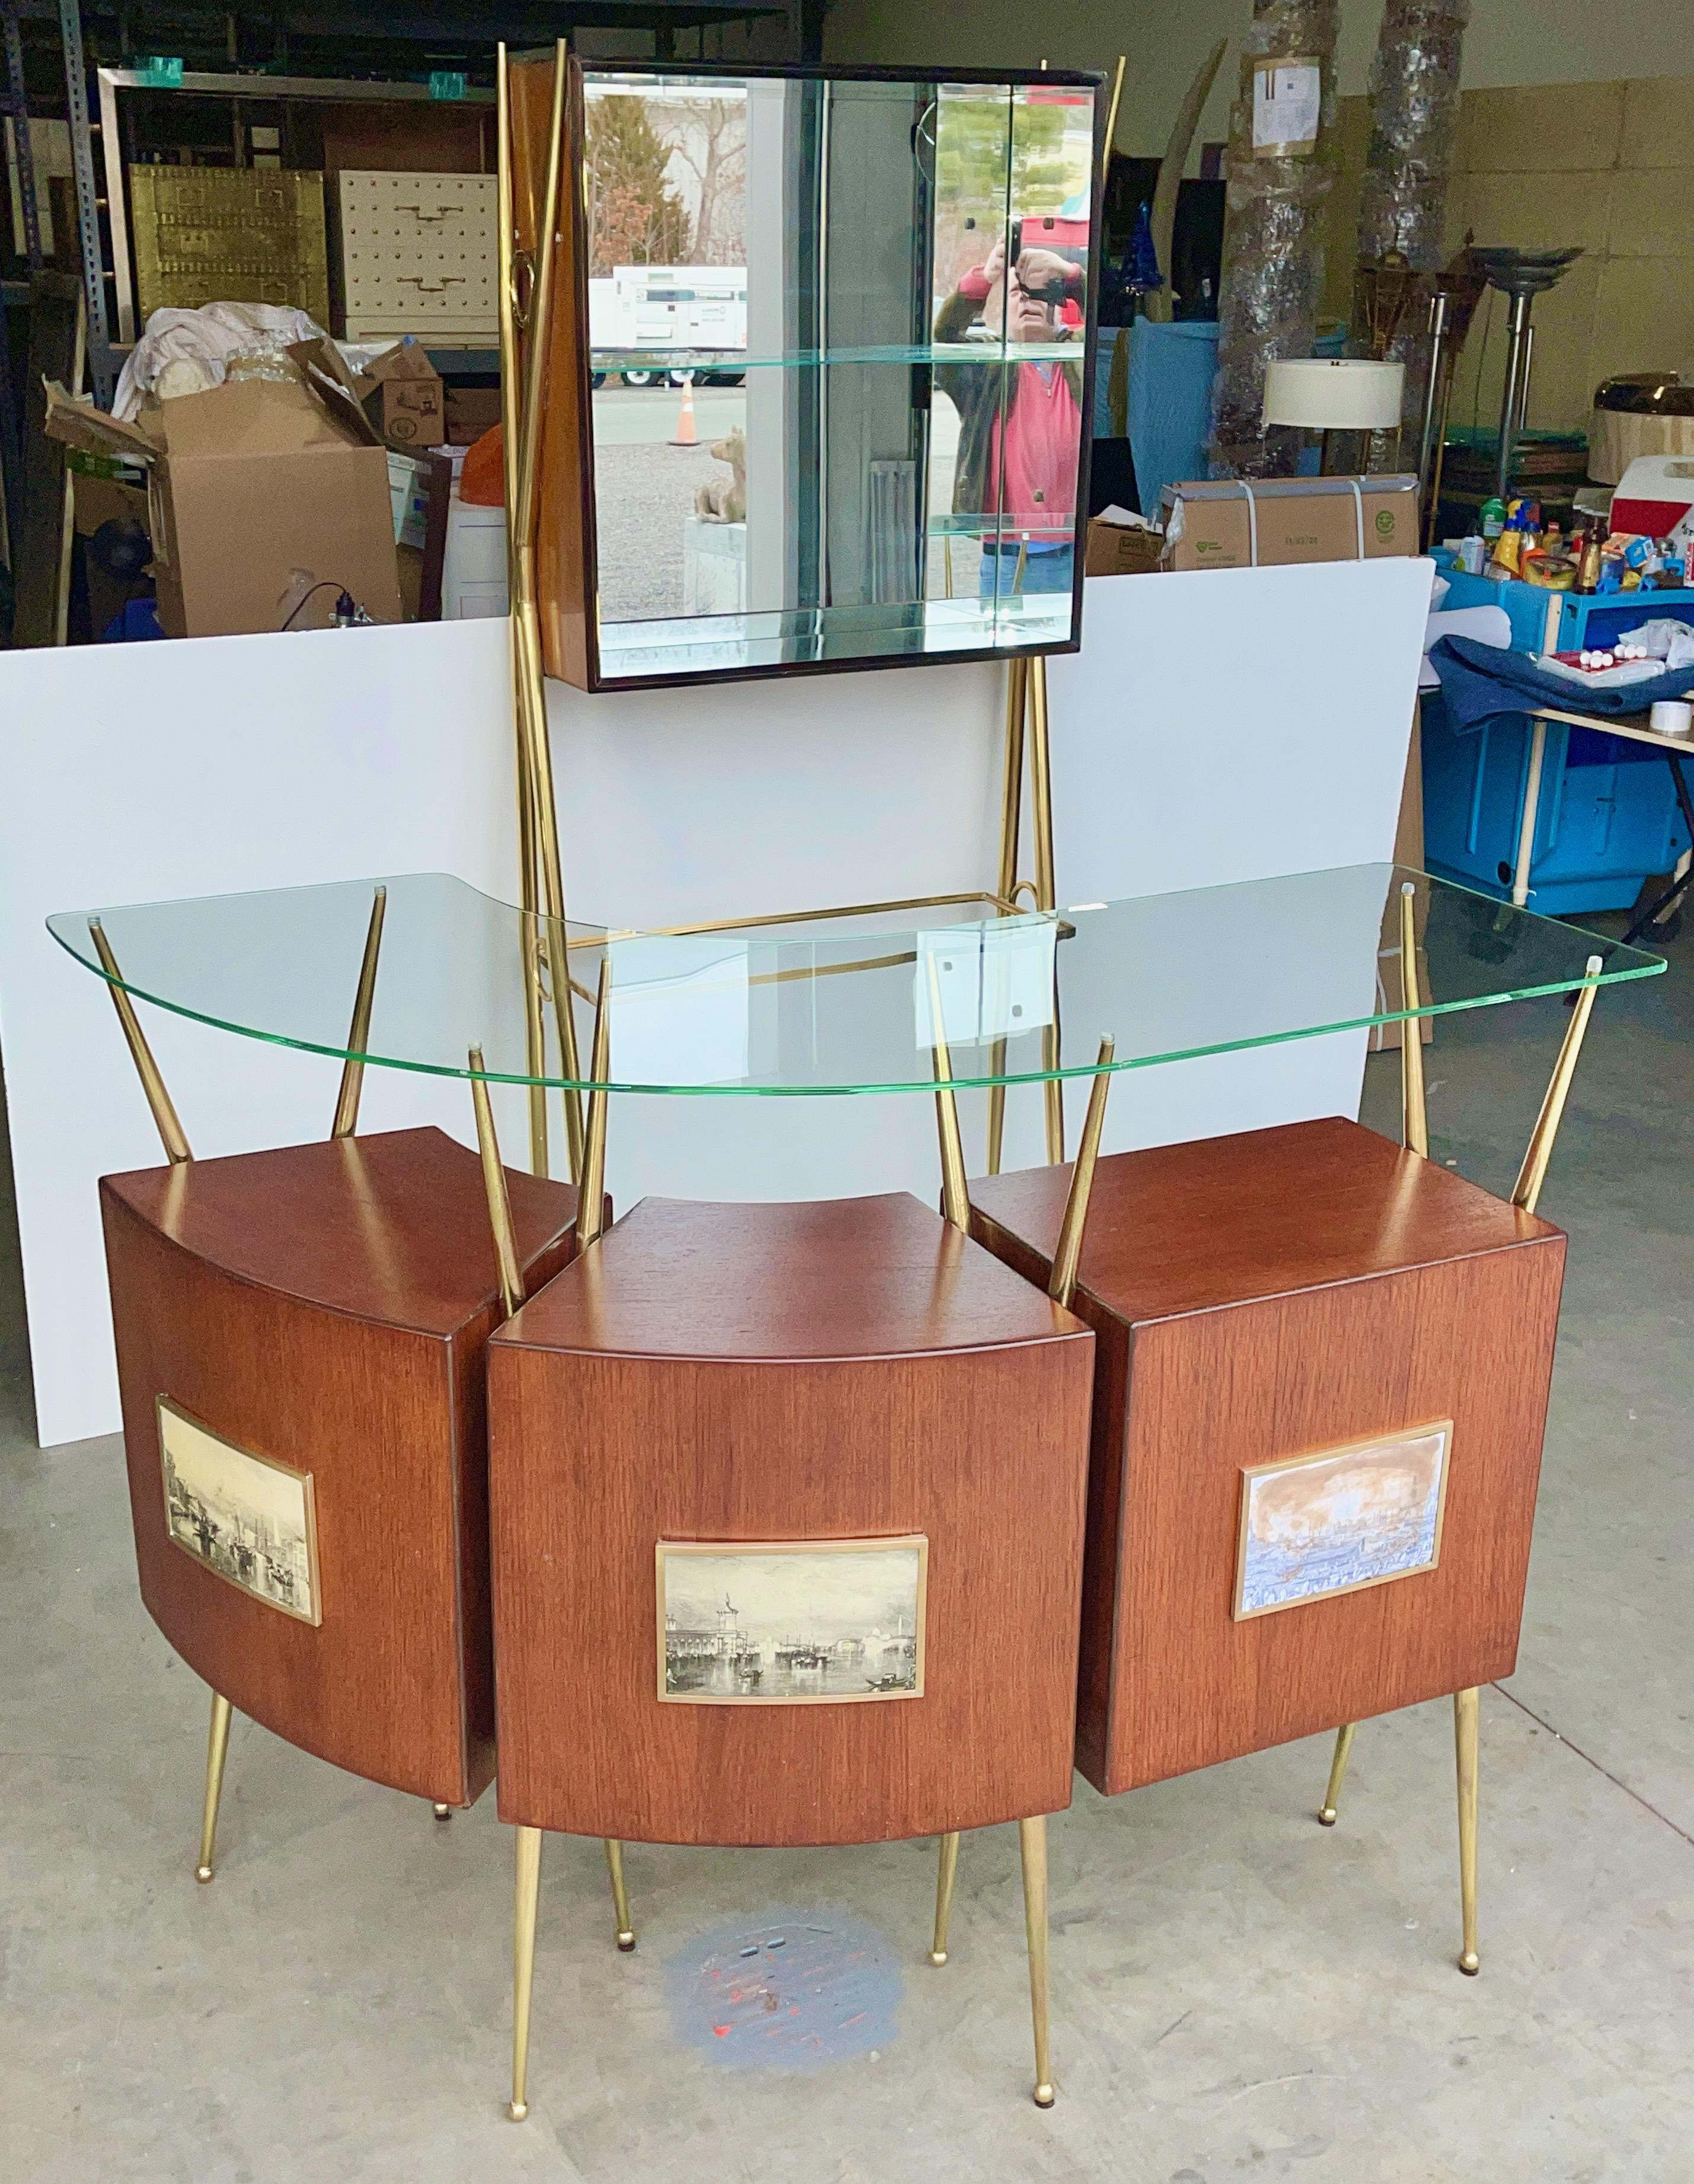 Paradigmatic 1950s Italian design emblematic of La Dolce Vita, floating bar and giraffe like back-bar consisting of case units in walnut veneer held aloft by angular tapered tubular brass scaffolds.
Standing bar has three open cabinets and a curved